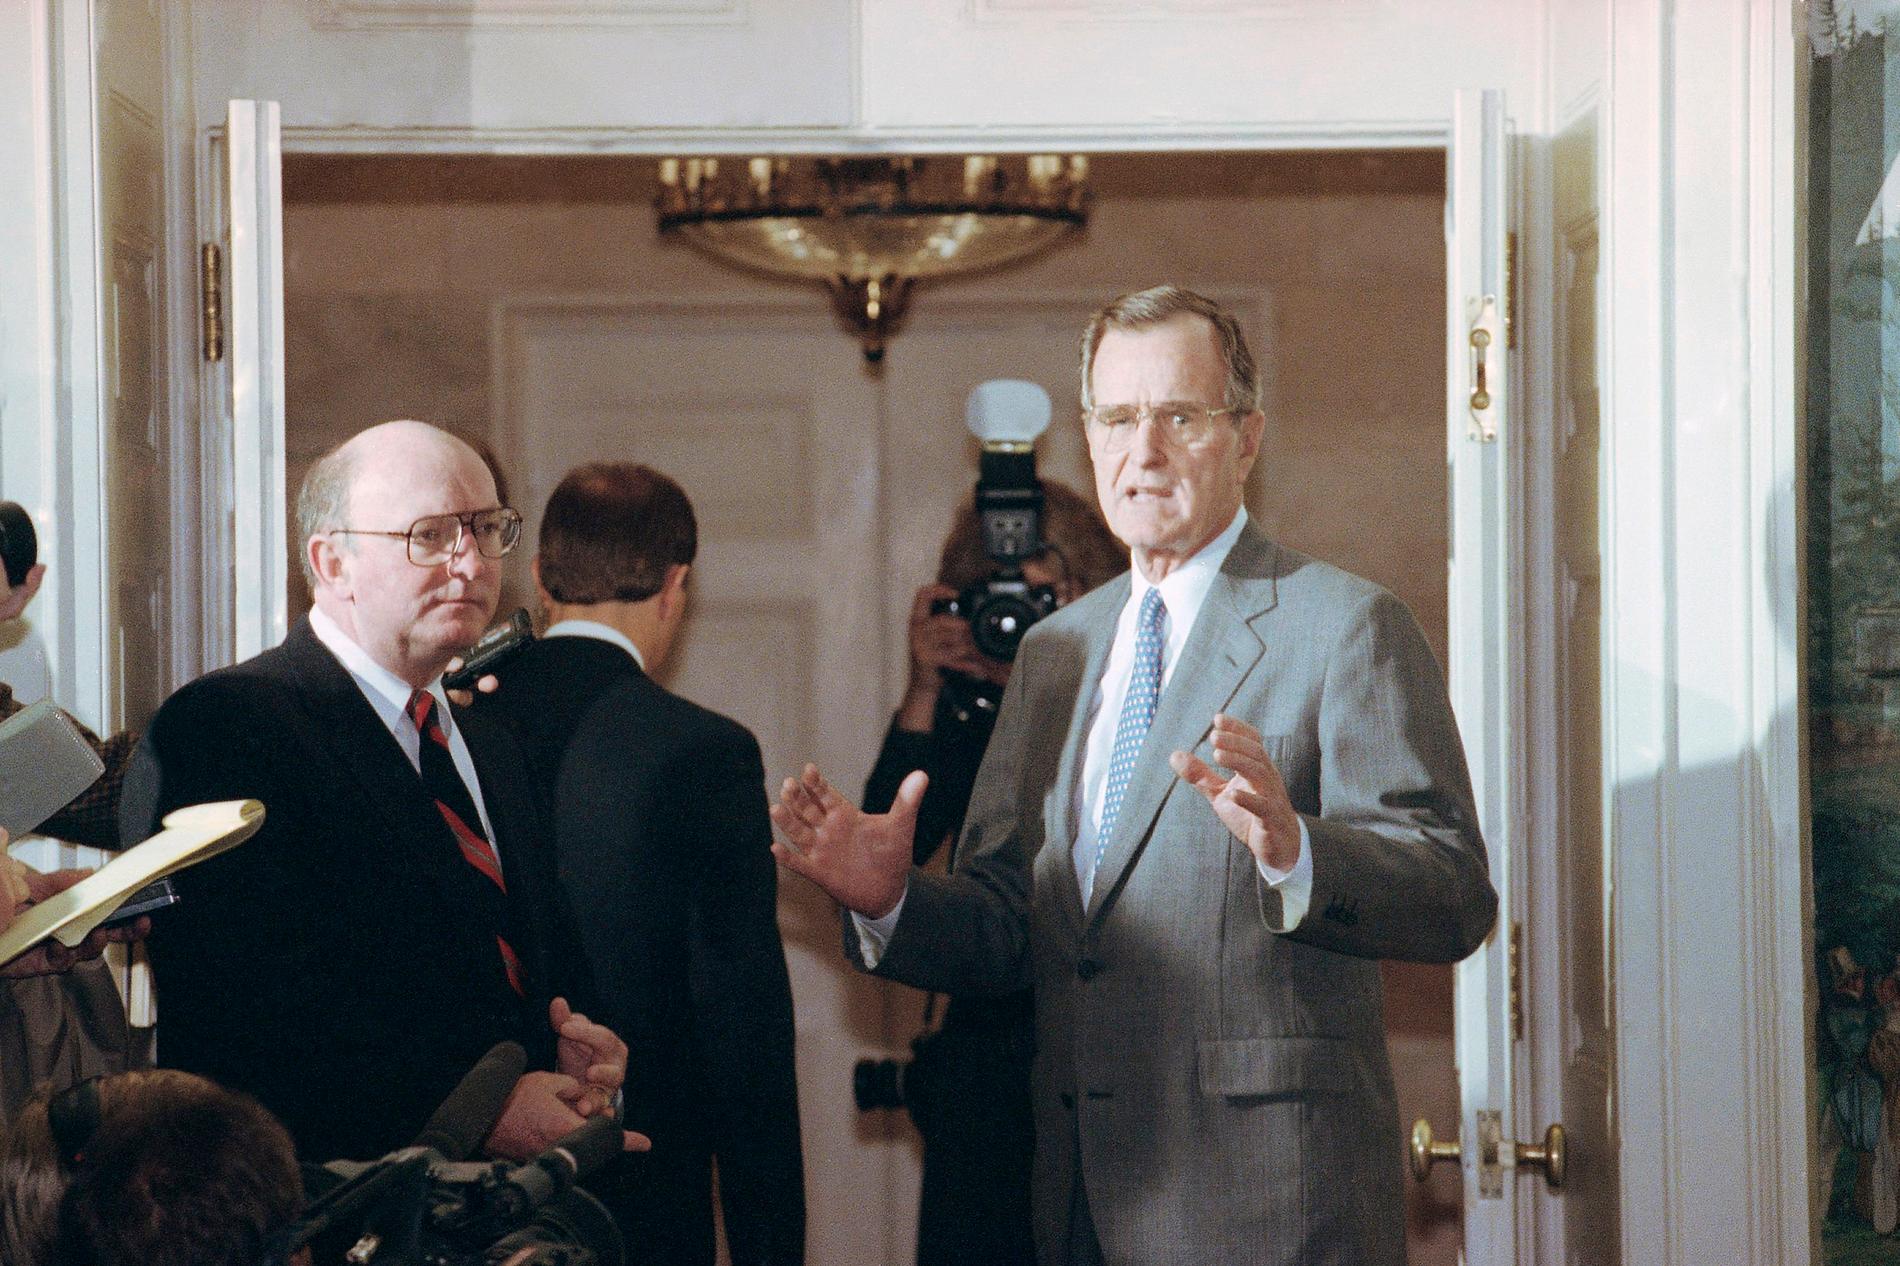 George H. W. Bush, center, responds to reporters at the White House saying he sent a personal message to Soviet President Mikhail Gorbachev to make sure the Soviets understand our position on Lithuania, Friday, March 30, 1990, Washington, D.C